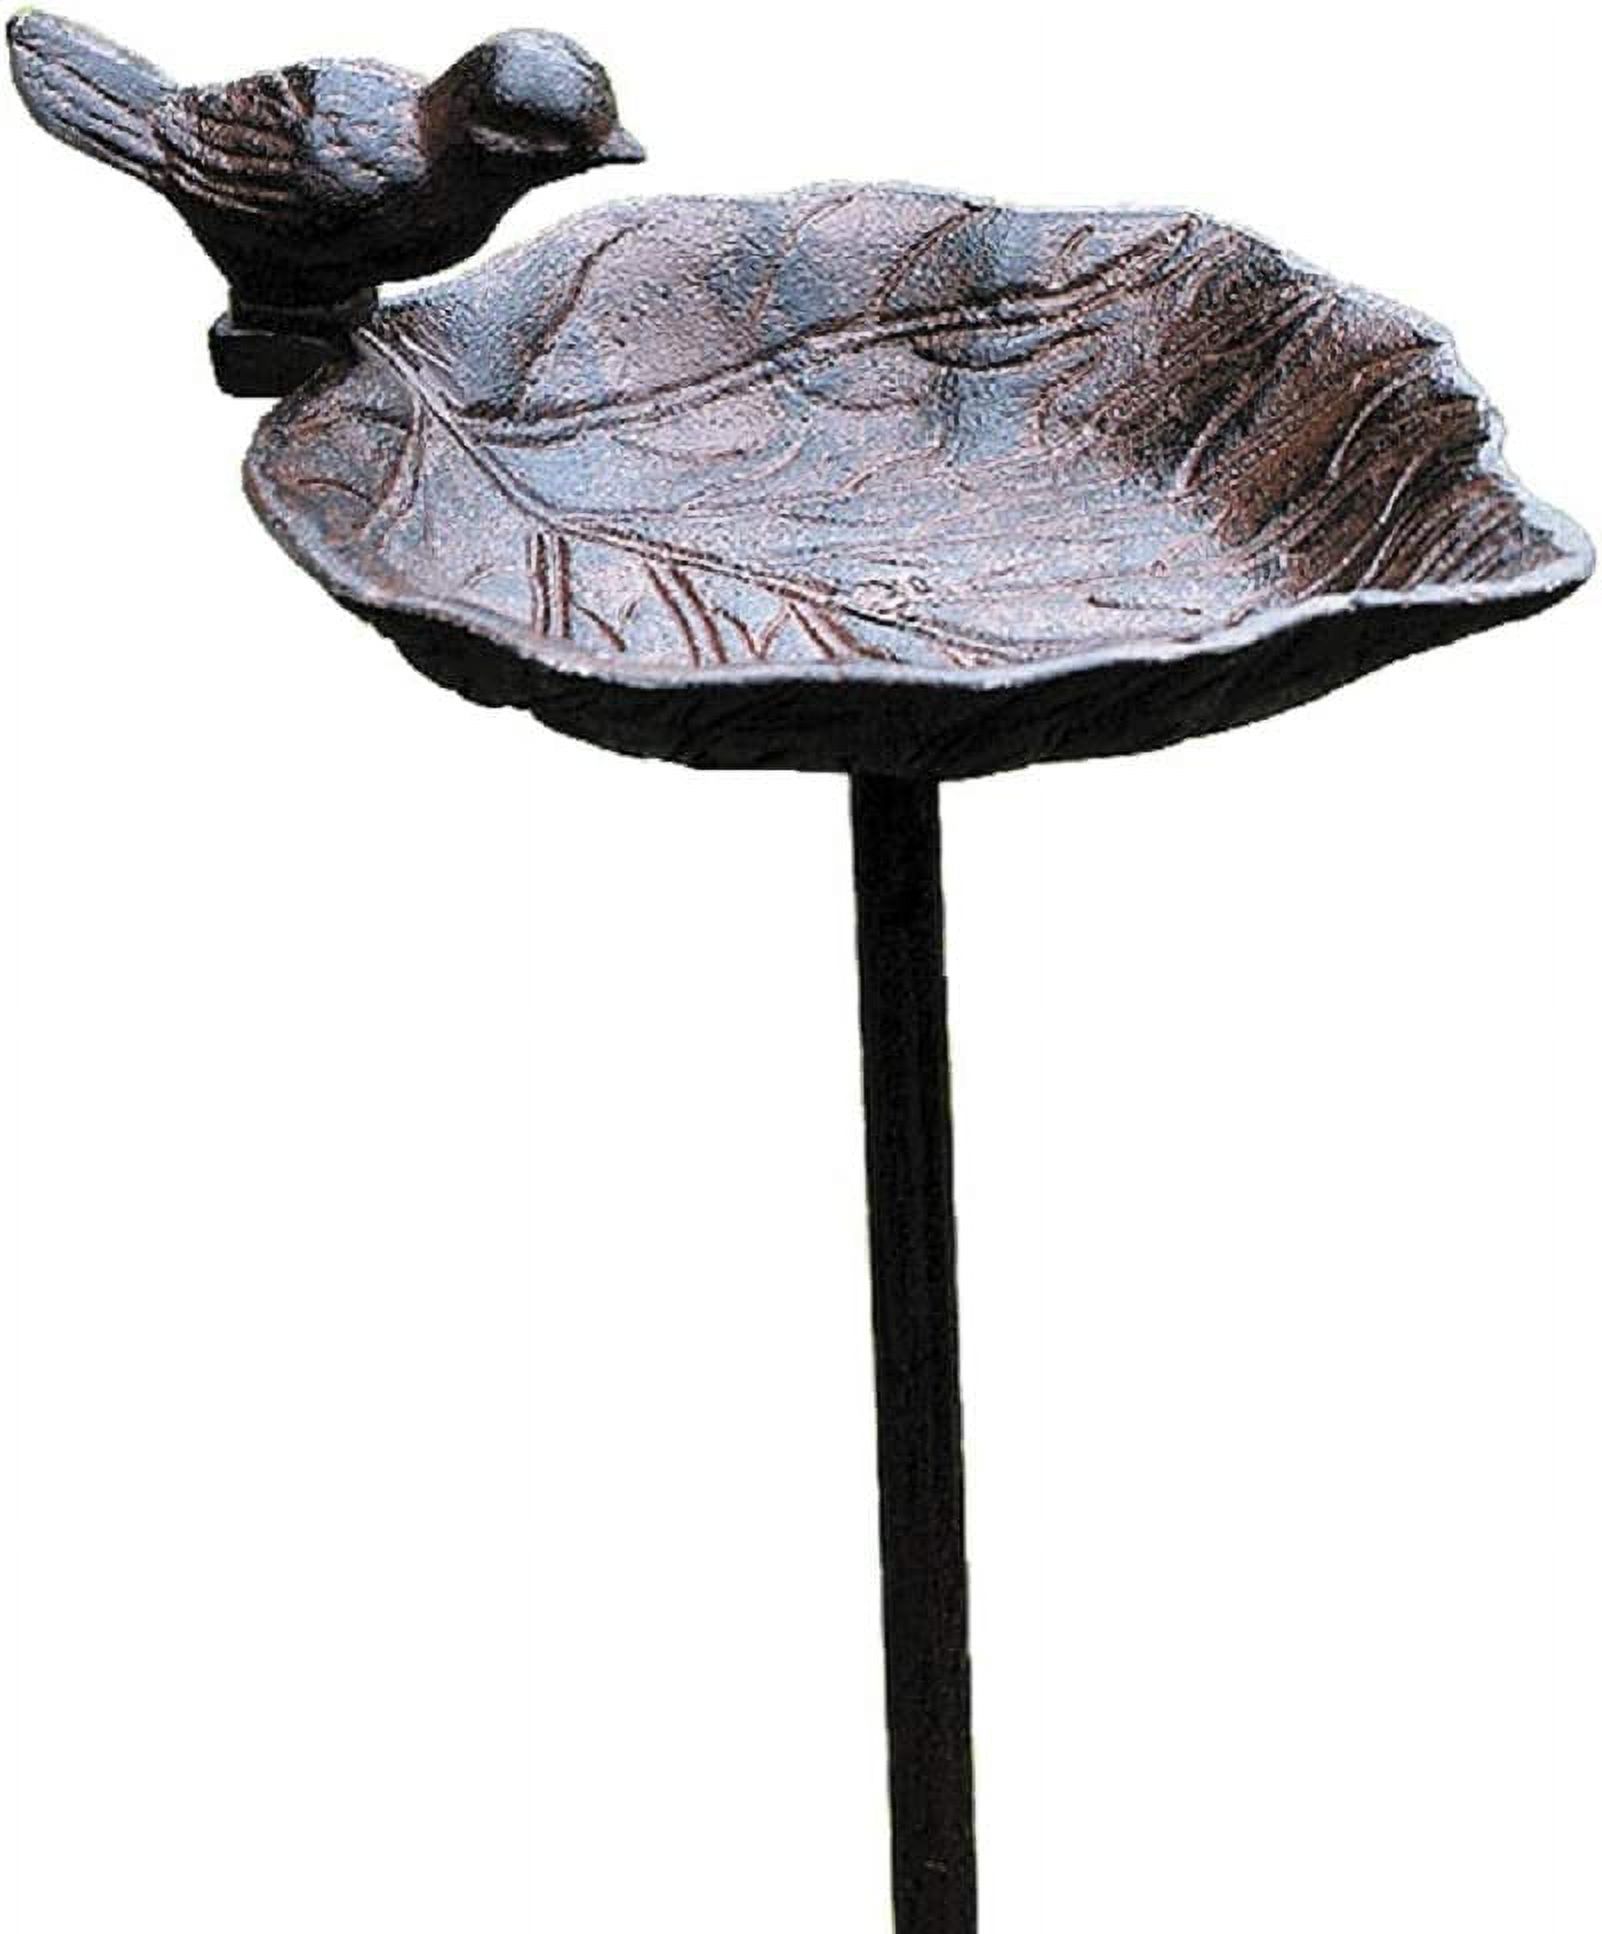 Country-Style, Leaf with Bird, Garden Stake Bird Bath, Cast Iron, 3 Feet 2 ½ Inches Tall - image 1 of 5